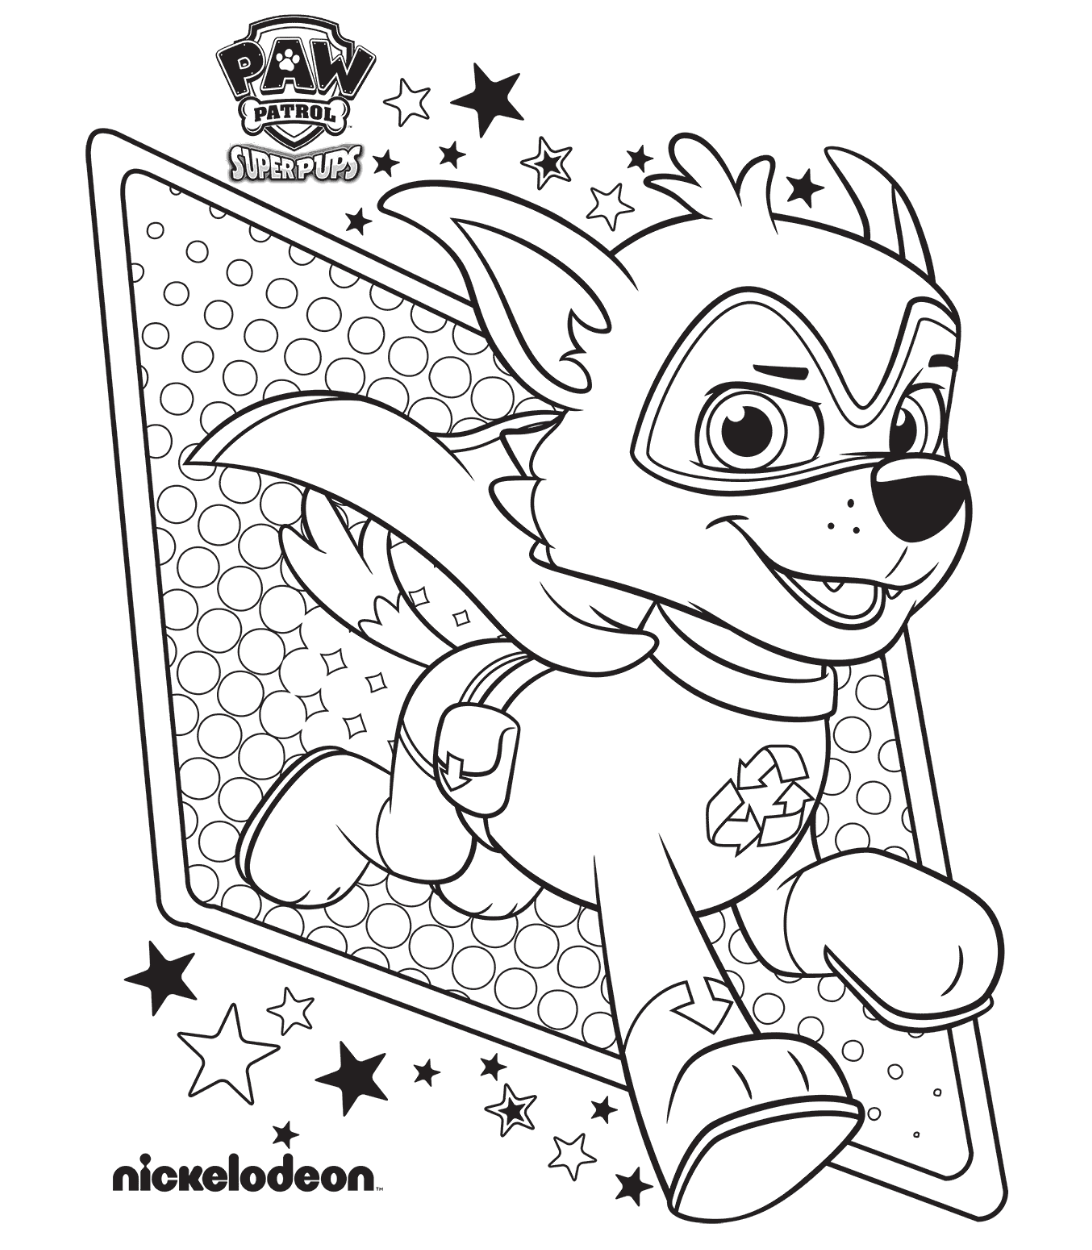 New PAW Patrol Super Pups Coloring Page | Paw patrol coloring ...